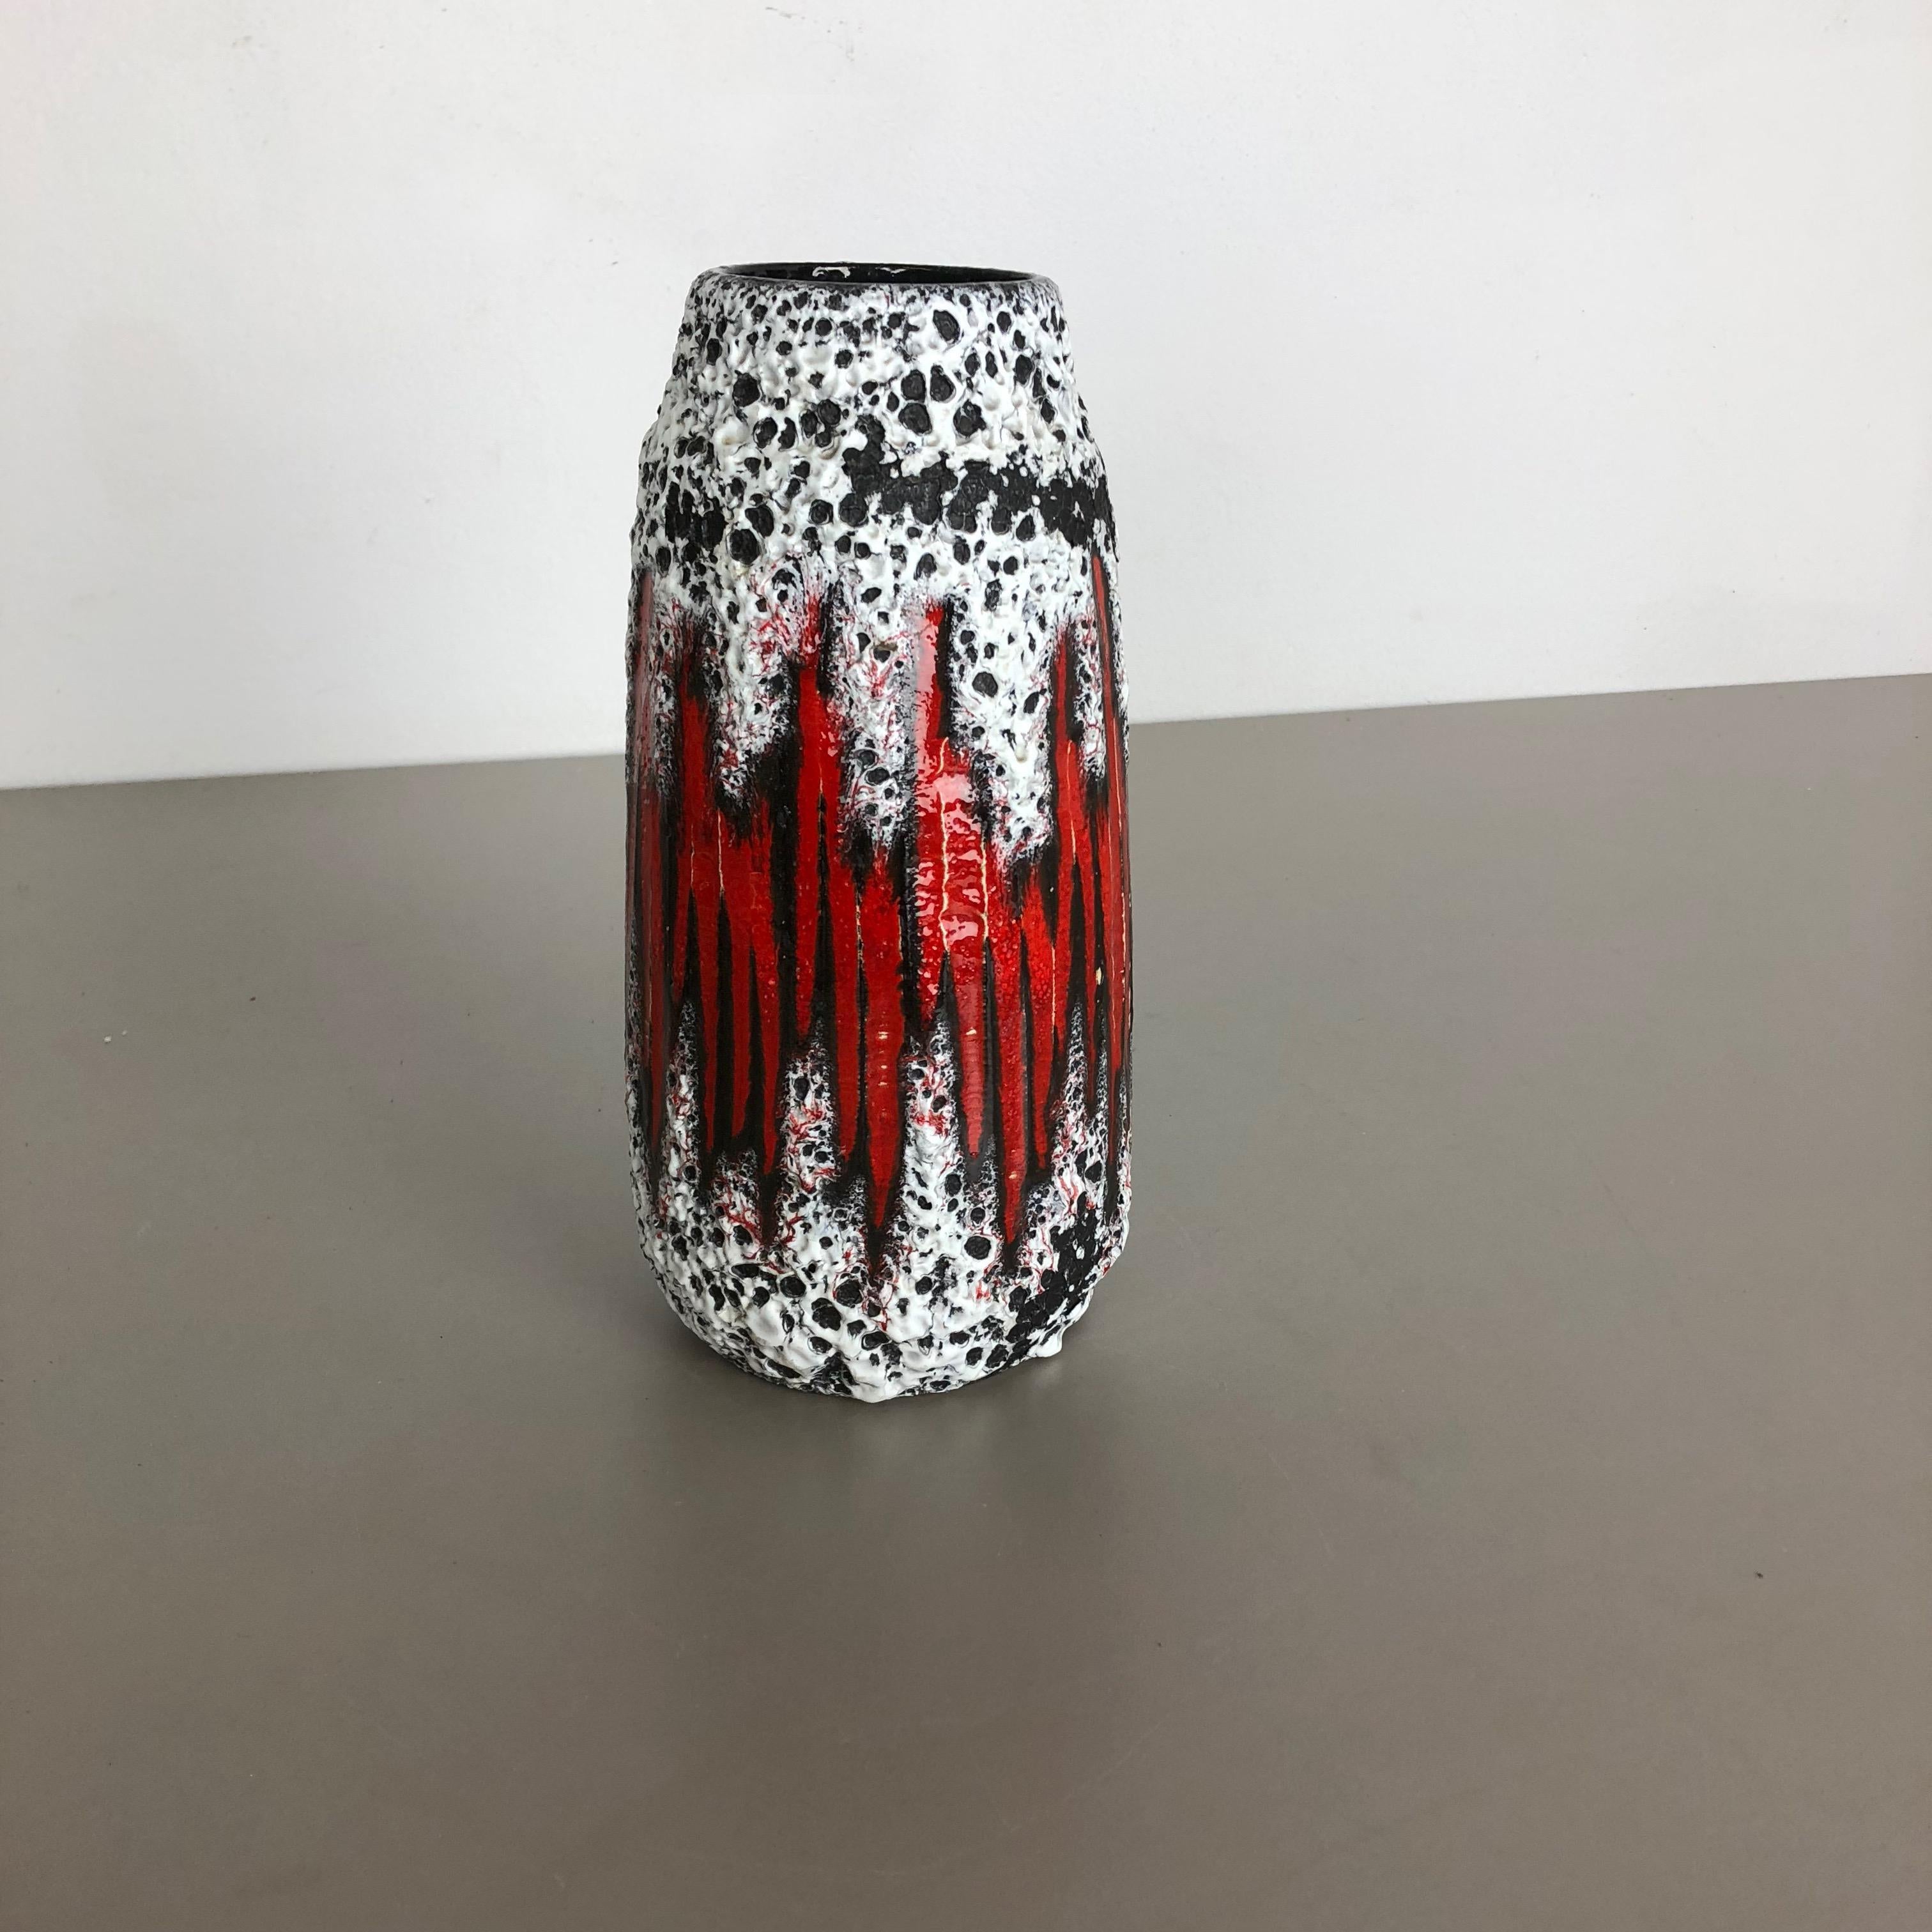 Article:

Fat lava art vase super rare black white red


Model: 203-26


Producer:

Scheurich, Germany



Decade:

1970s




This original vintage vase was produced in the 1970s in Germany by Scheurich. It is made of ceramic